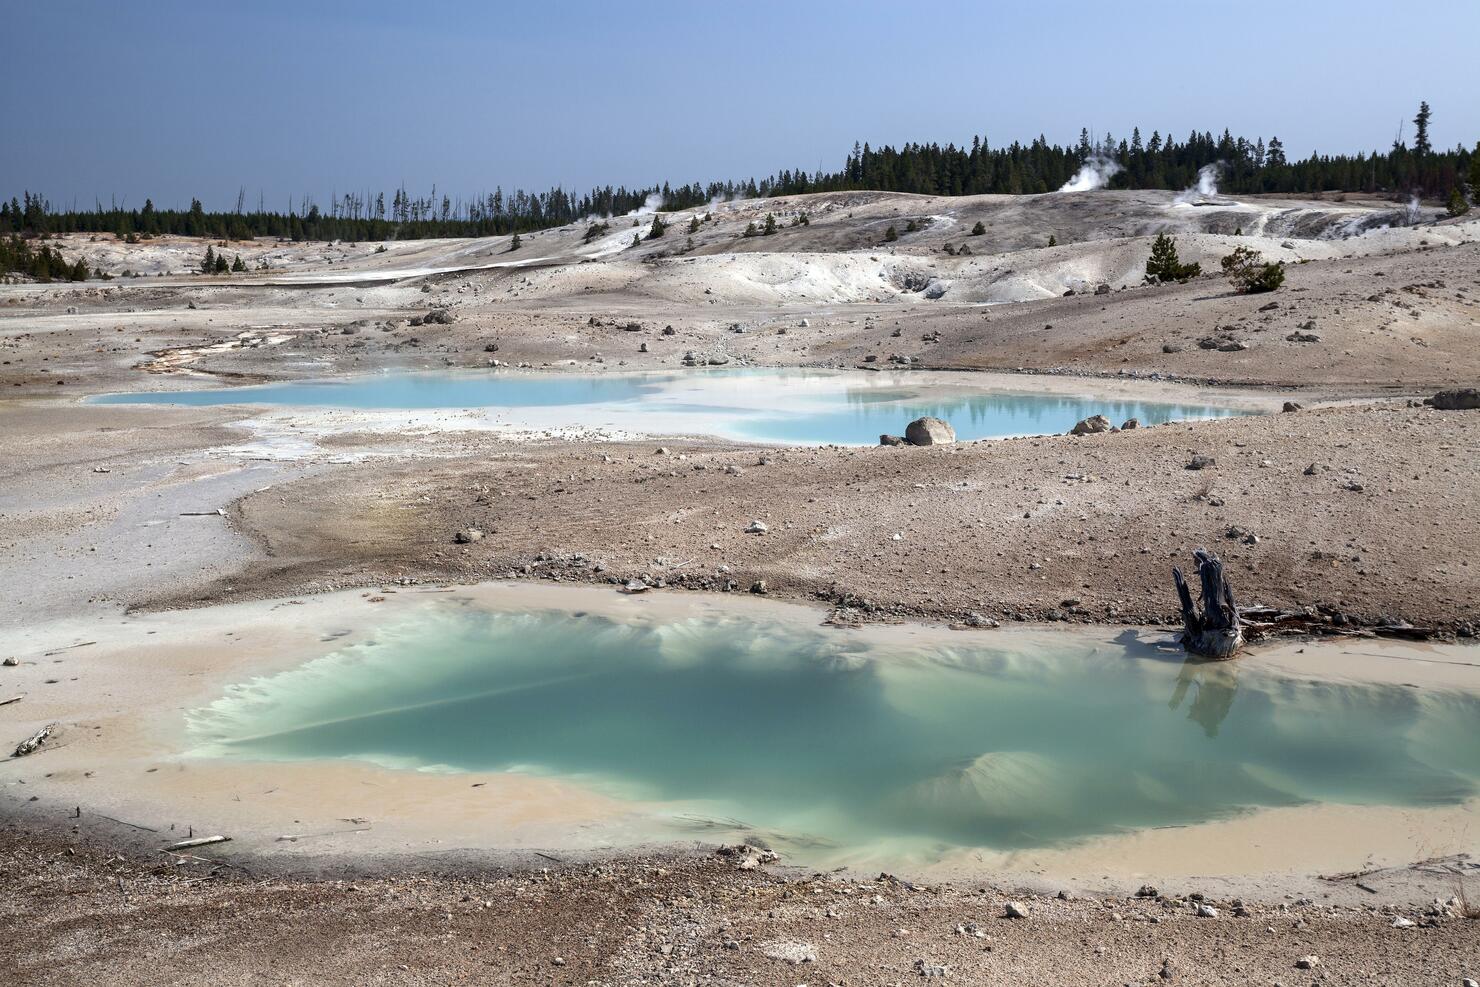 Hot springs and mineral deposits in the Porcelain Basin, Norris Geyser Basin, Yellowstone National Park, Wyoming, USA